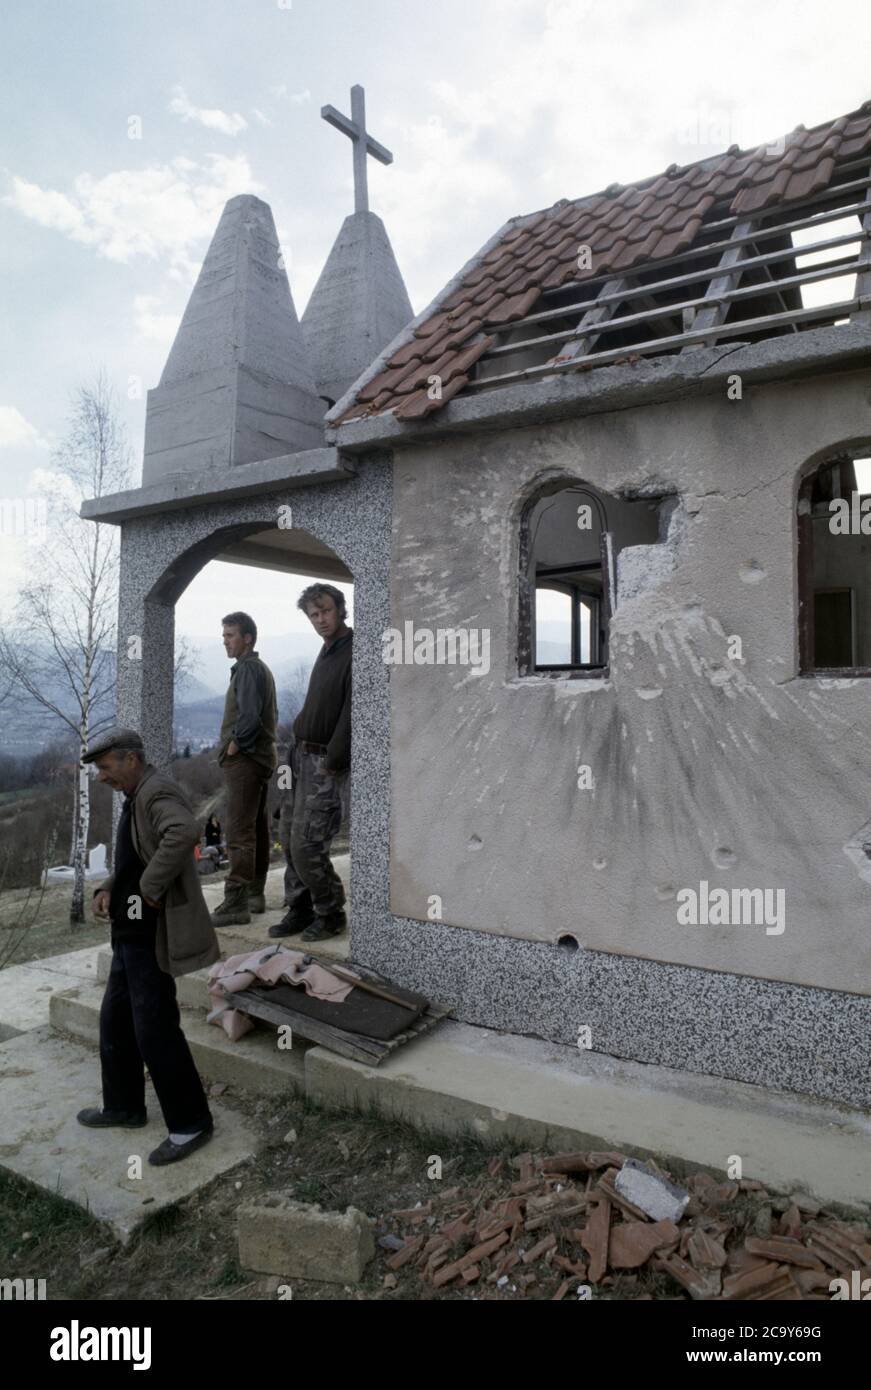 26th March 1994 During the war in Bosnia: on the front line, a small cemetery near Krčevine, just north of Vitez, Bosnian Croat soldiers stand in a small ruined chapel. Stock Photo